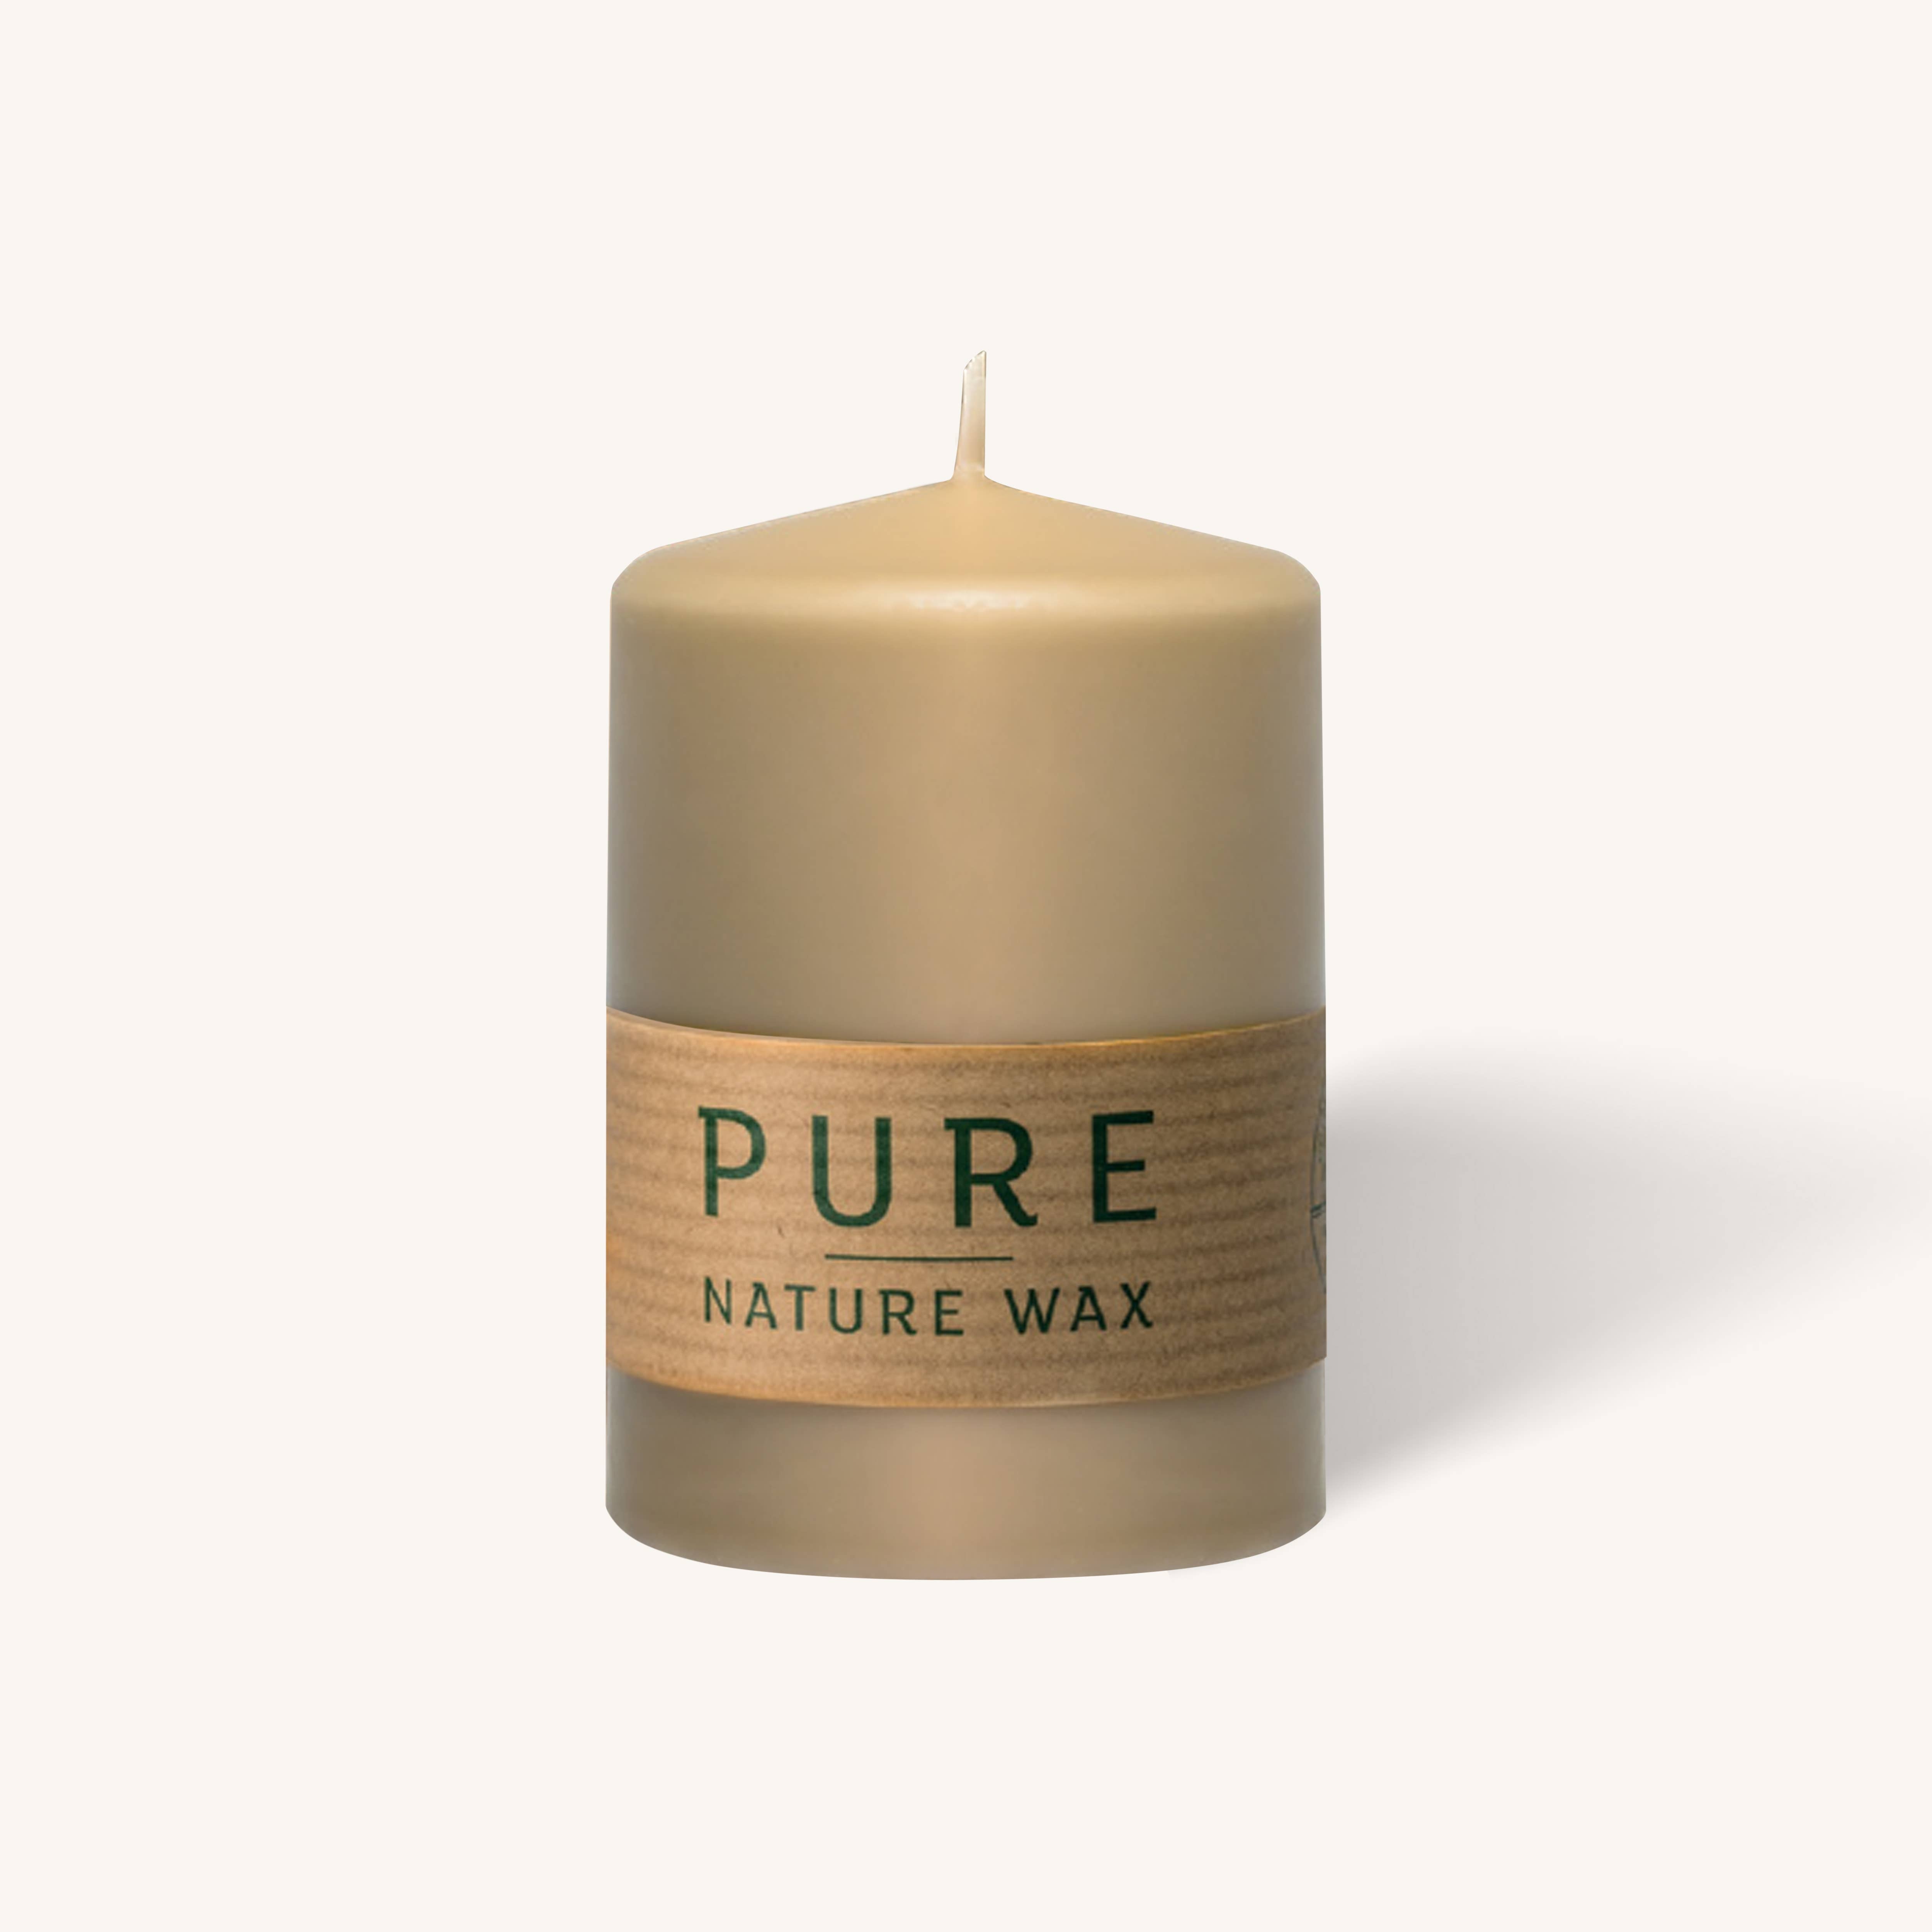 Pure Nature Wax Sand Pillar Candle - 2.7" x 3.5" - 3 Pack